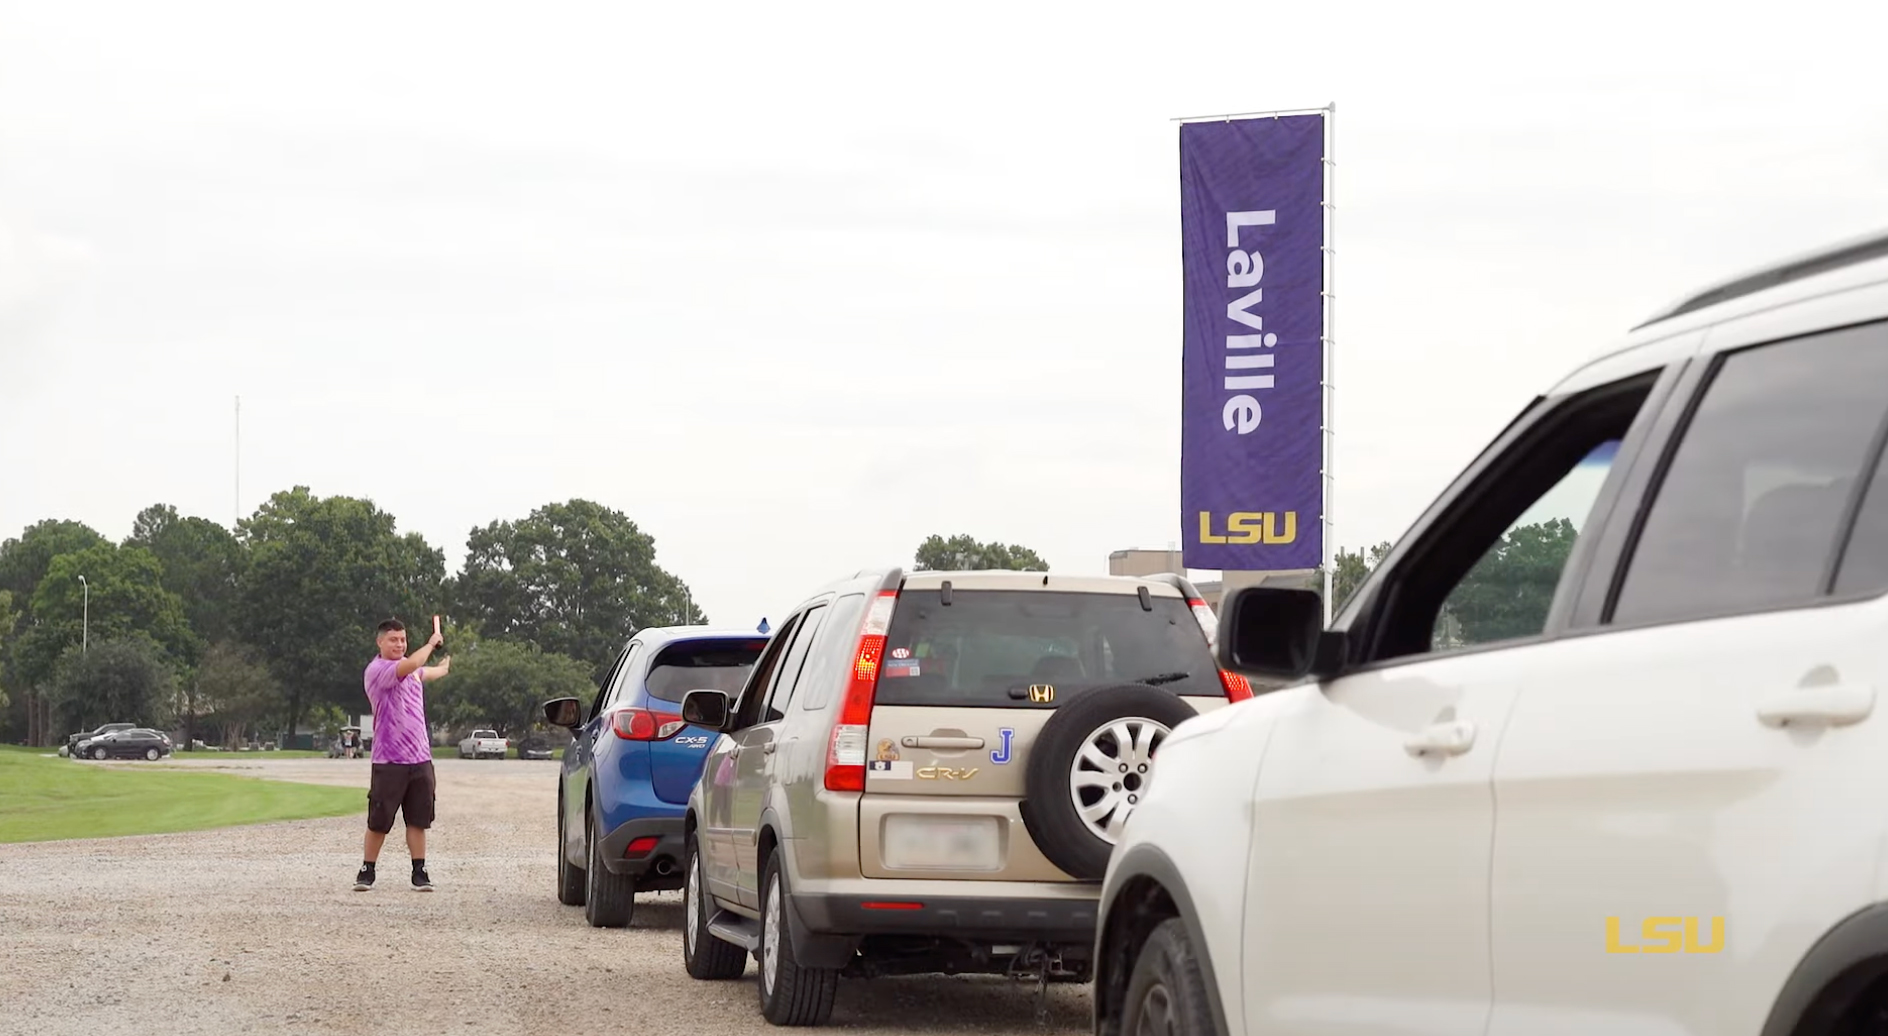 move-in at LSU video thumbnail